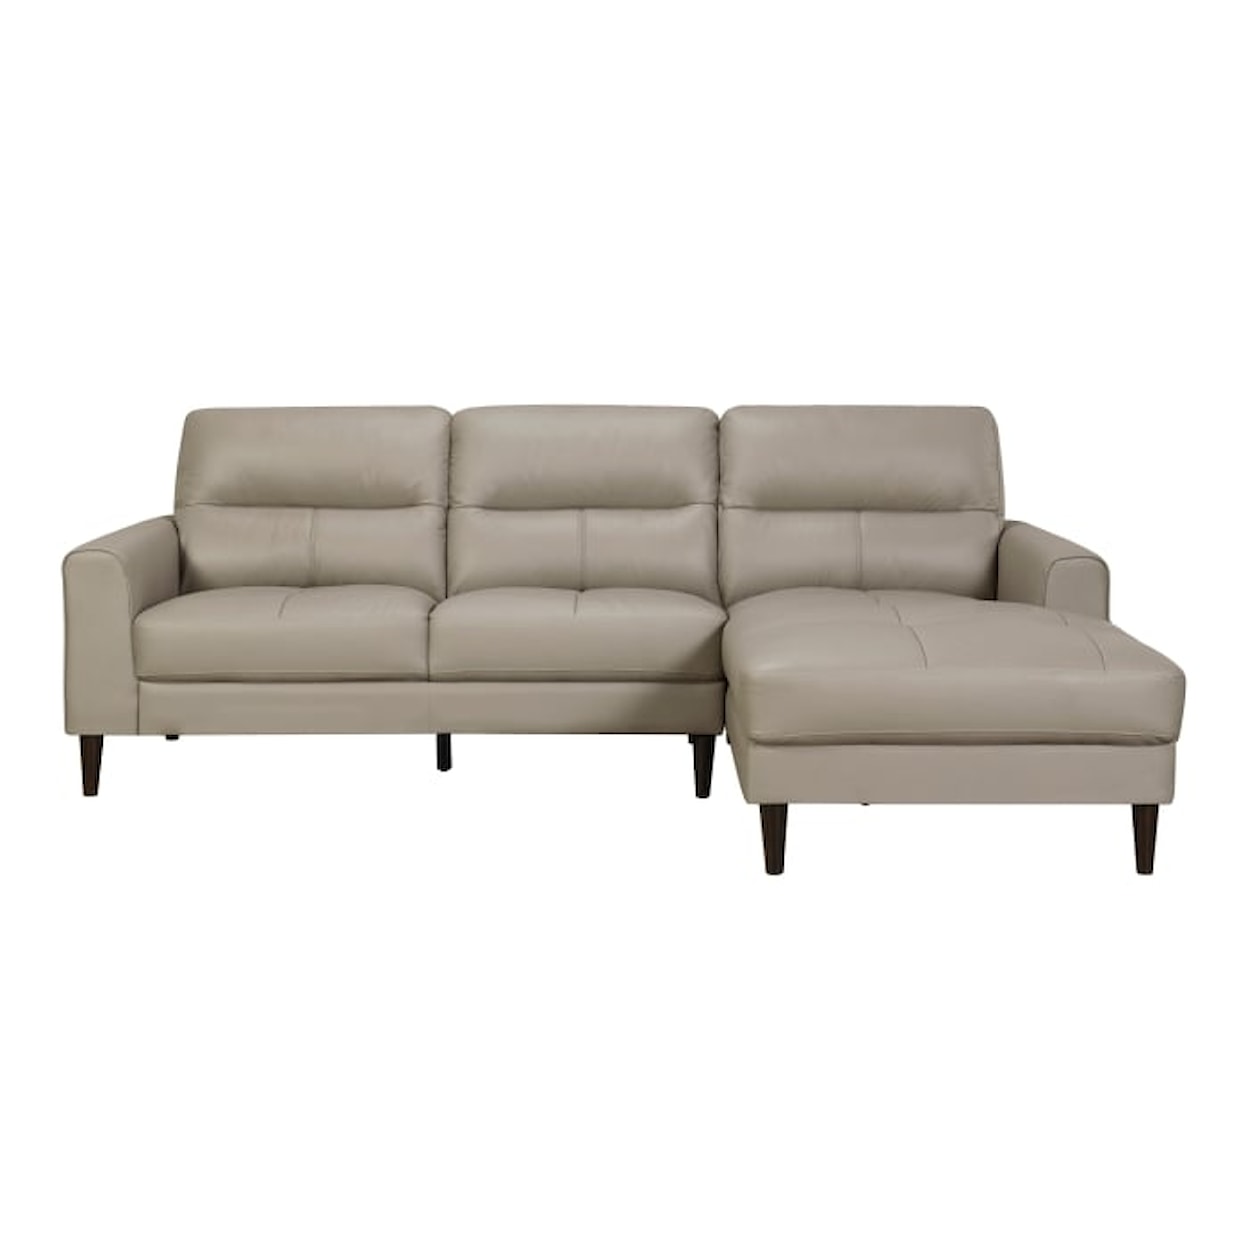 Homelegance Lewes 2-Piece Sectional with Right Chaise